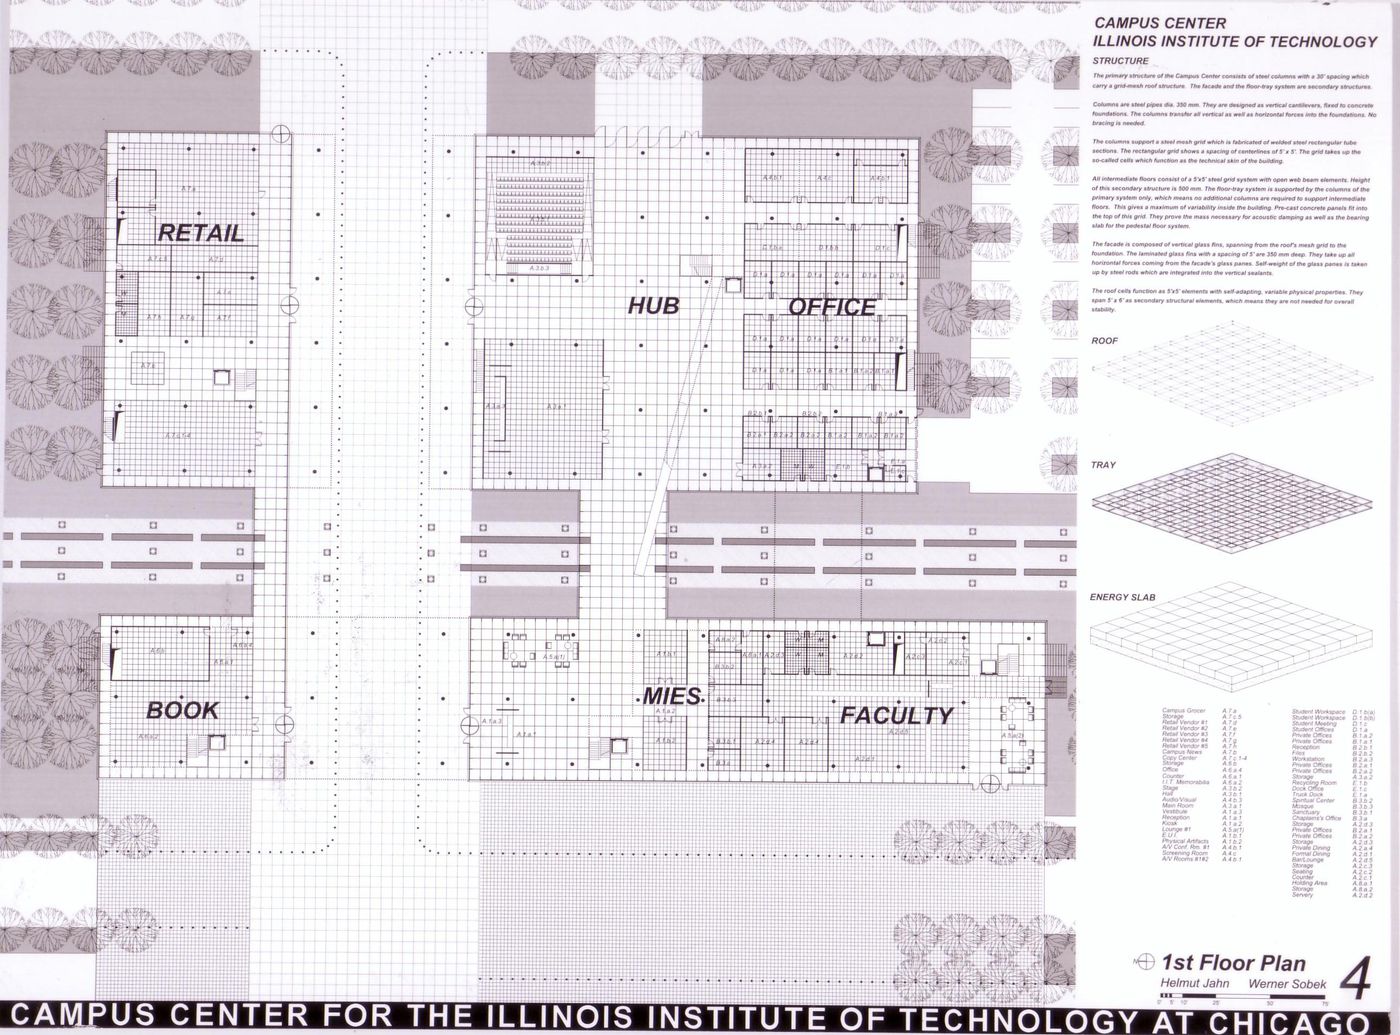 First floor plan and description of proposed structure, submission to the Richard H. Driehaus Foundation International Design Competition for a new campus center (1997-98), Illinois Institute of Technology, Chicago, Illinois